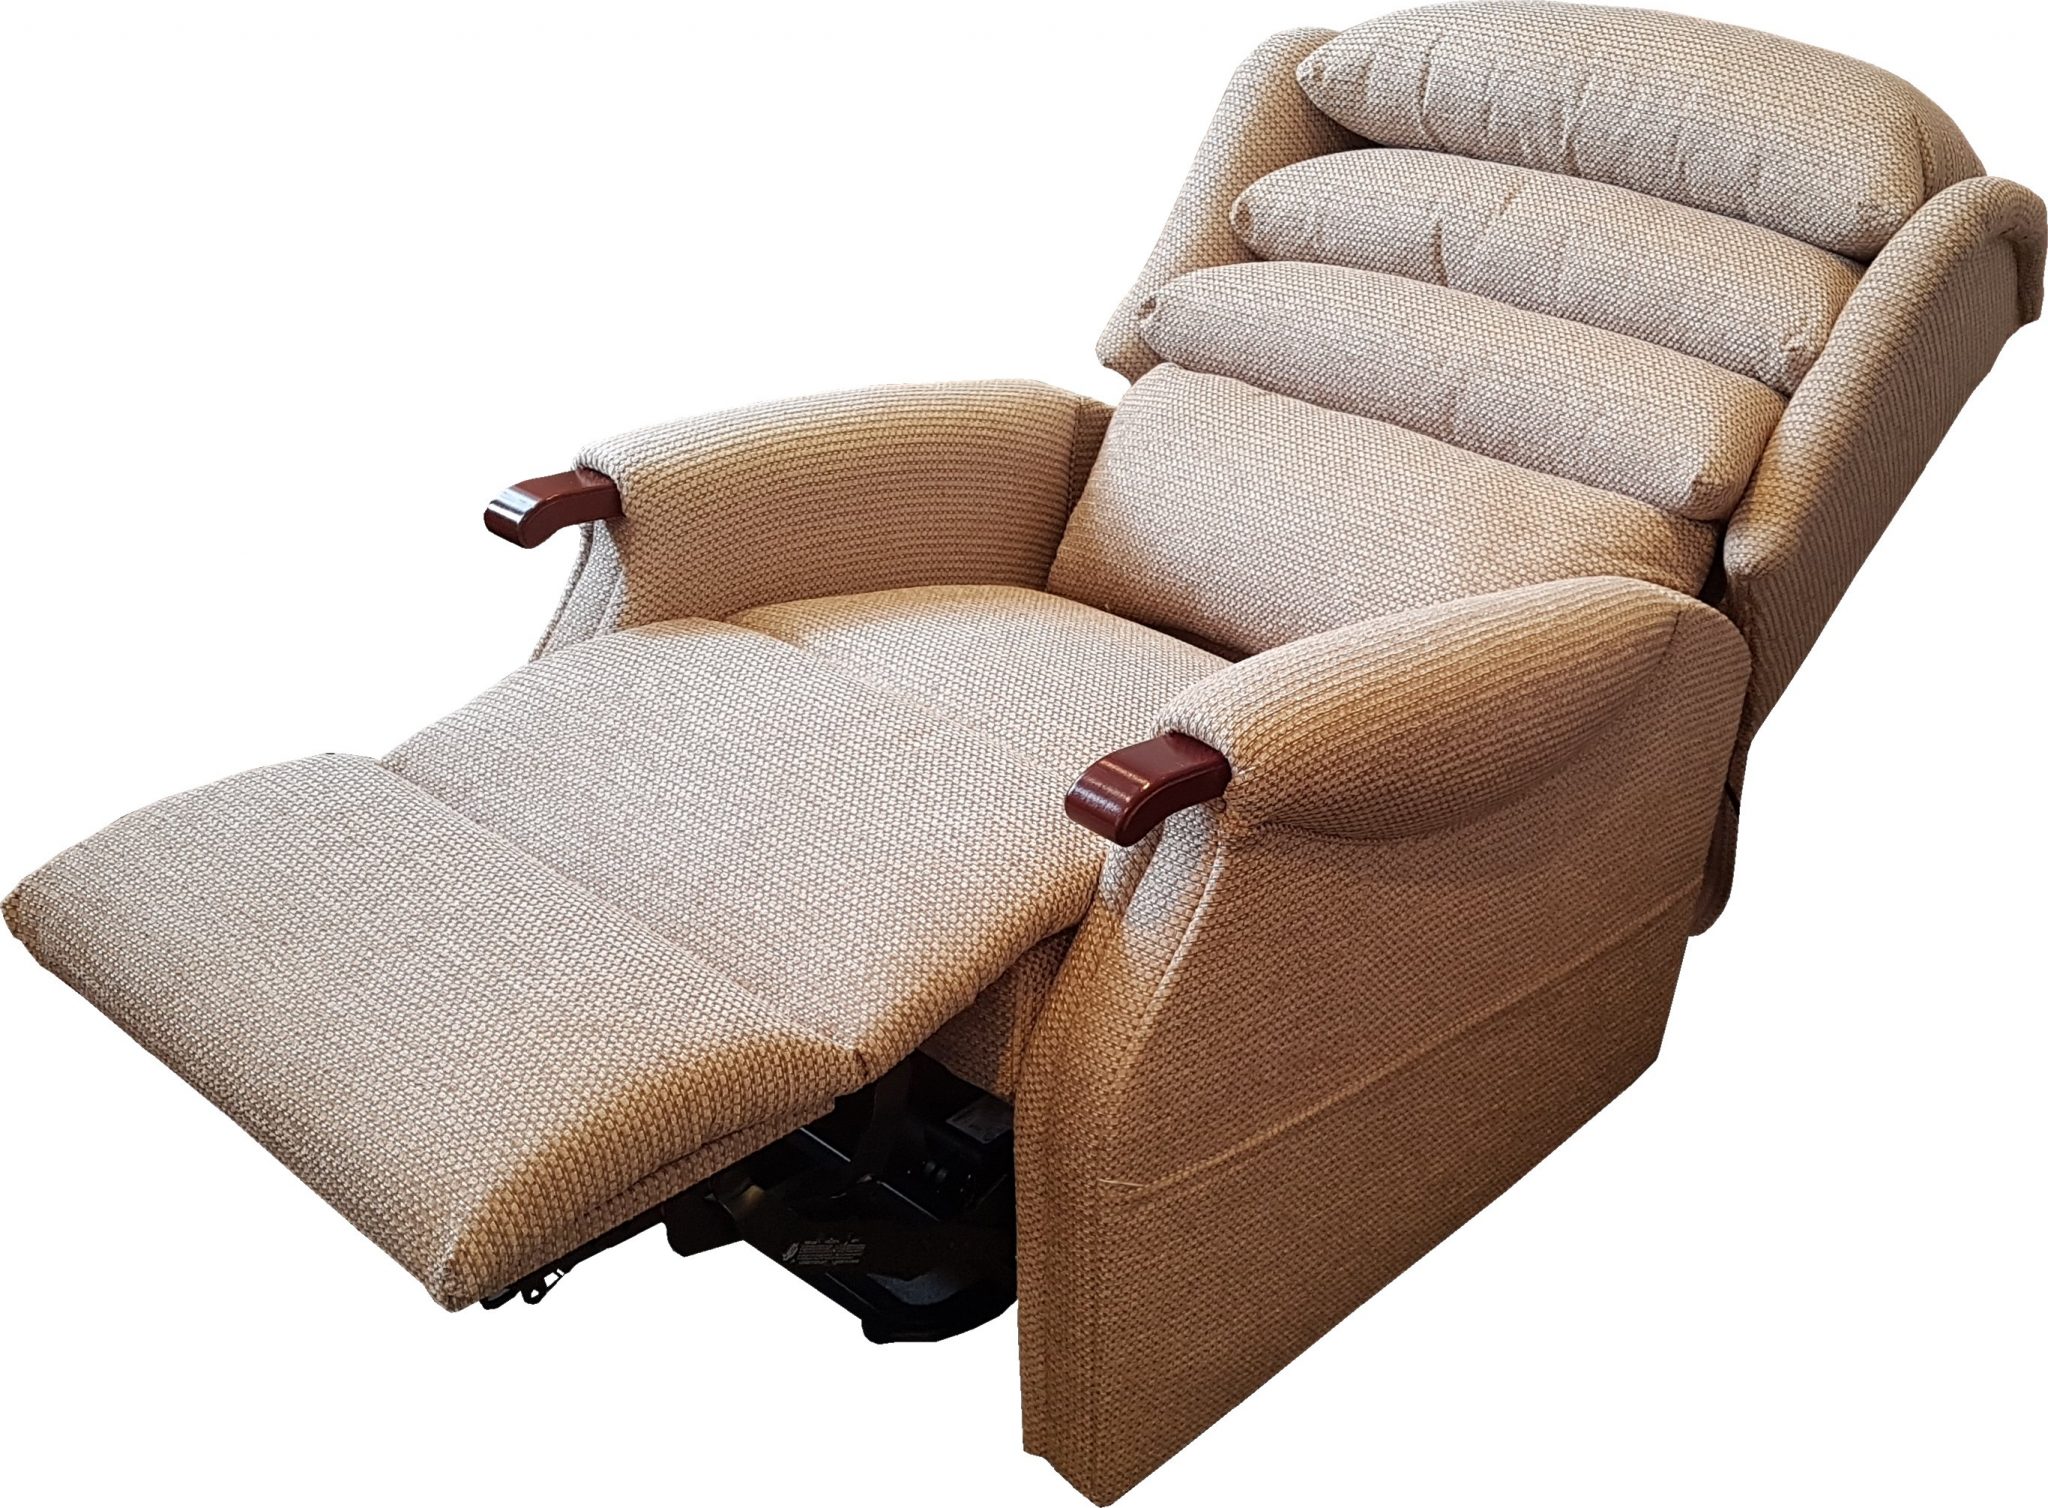 Riser-Recliner Chairs - The Bed Shop